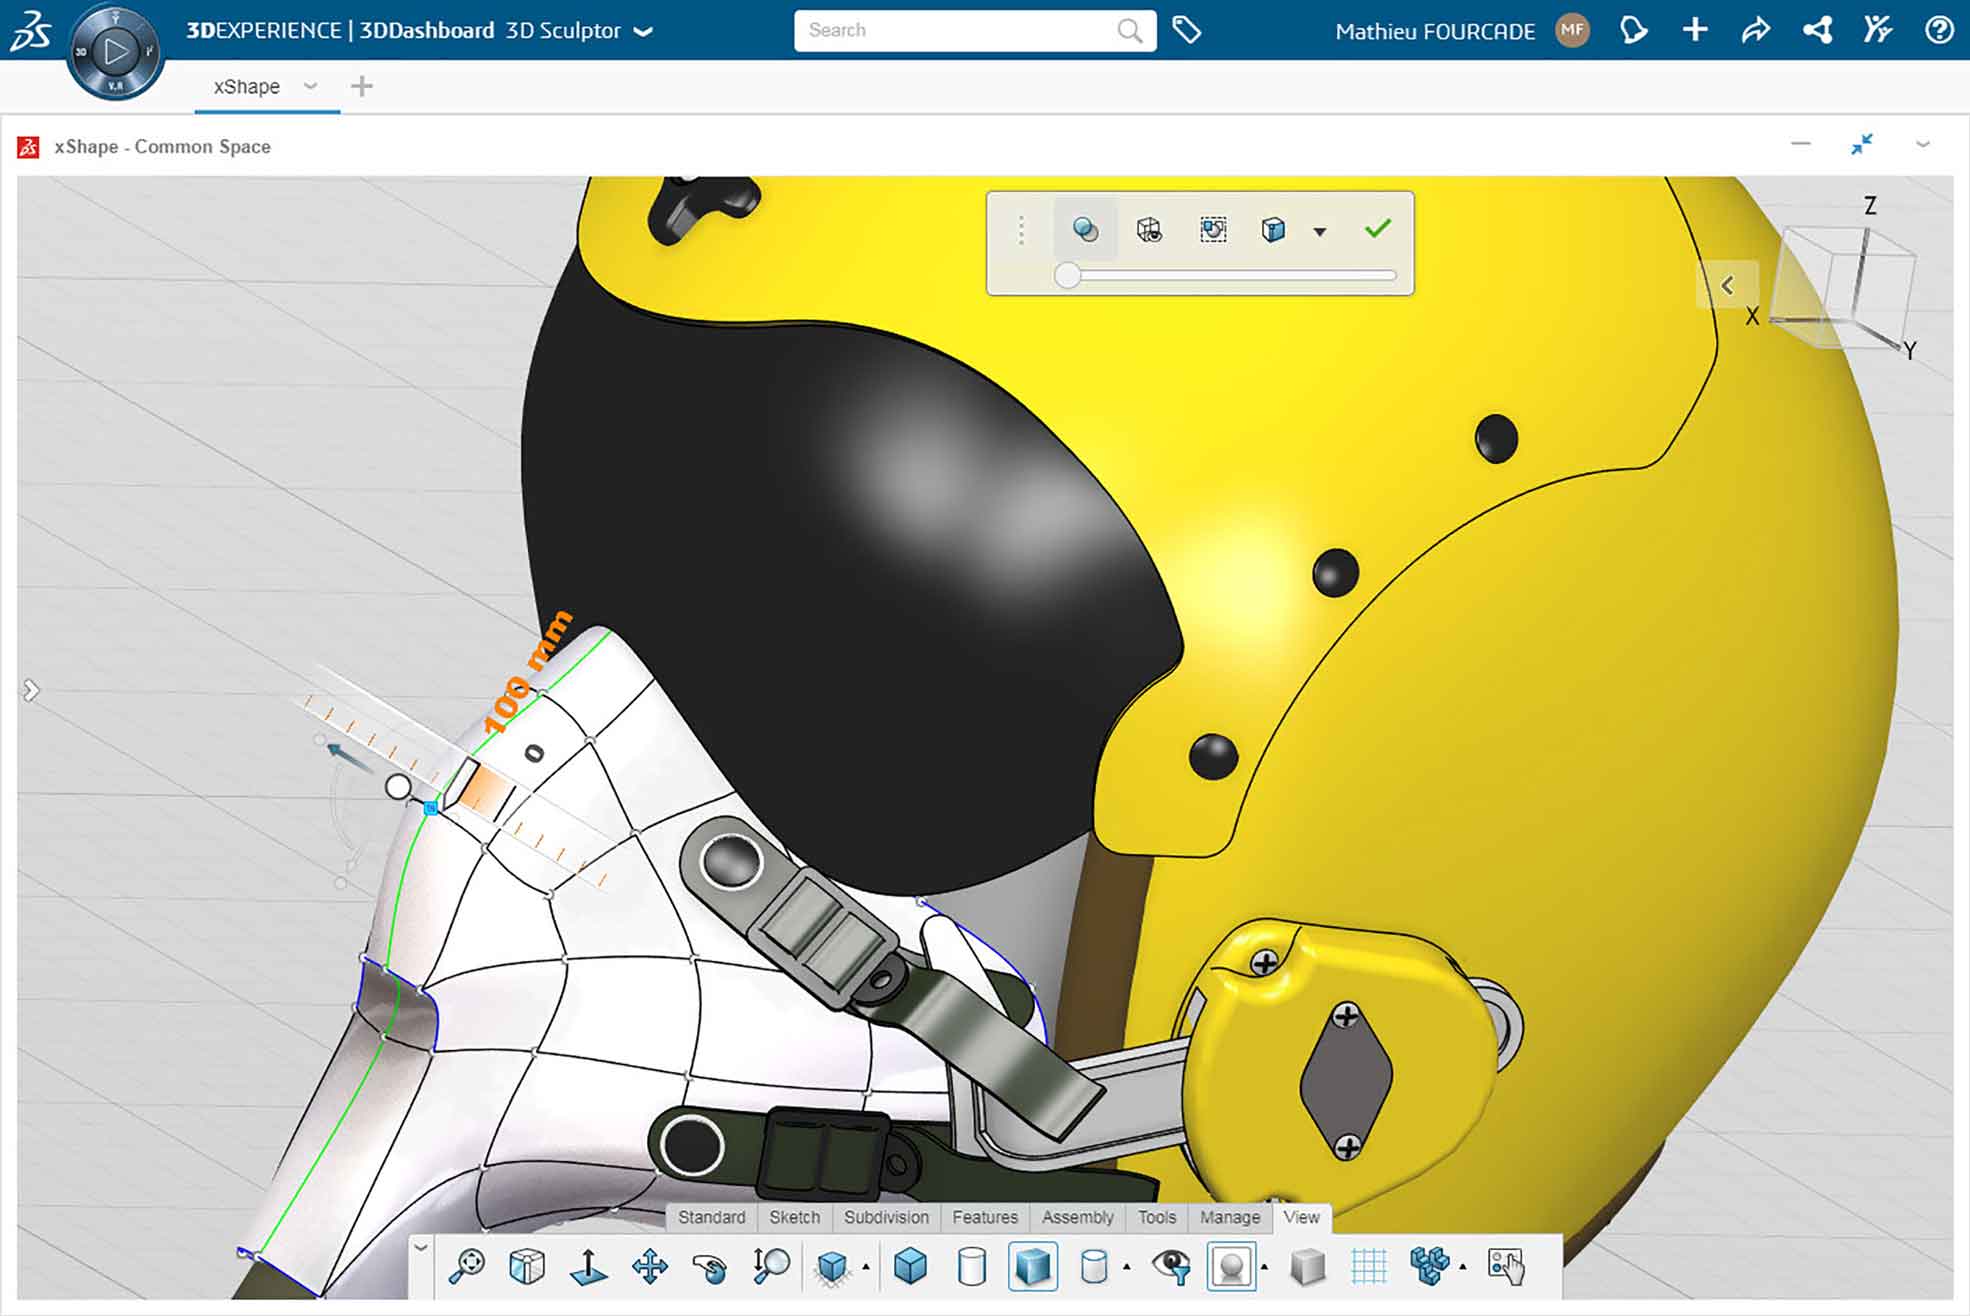 download solidworks 3d experience